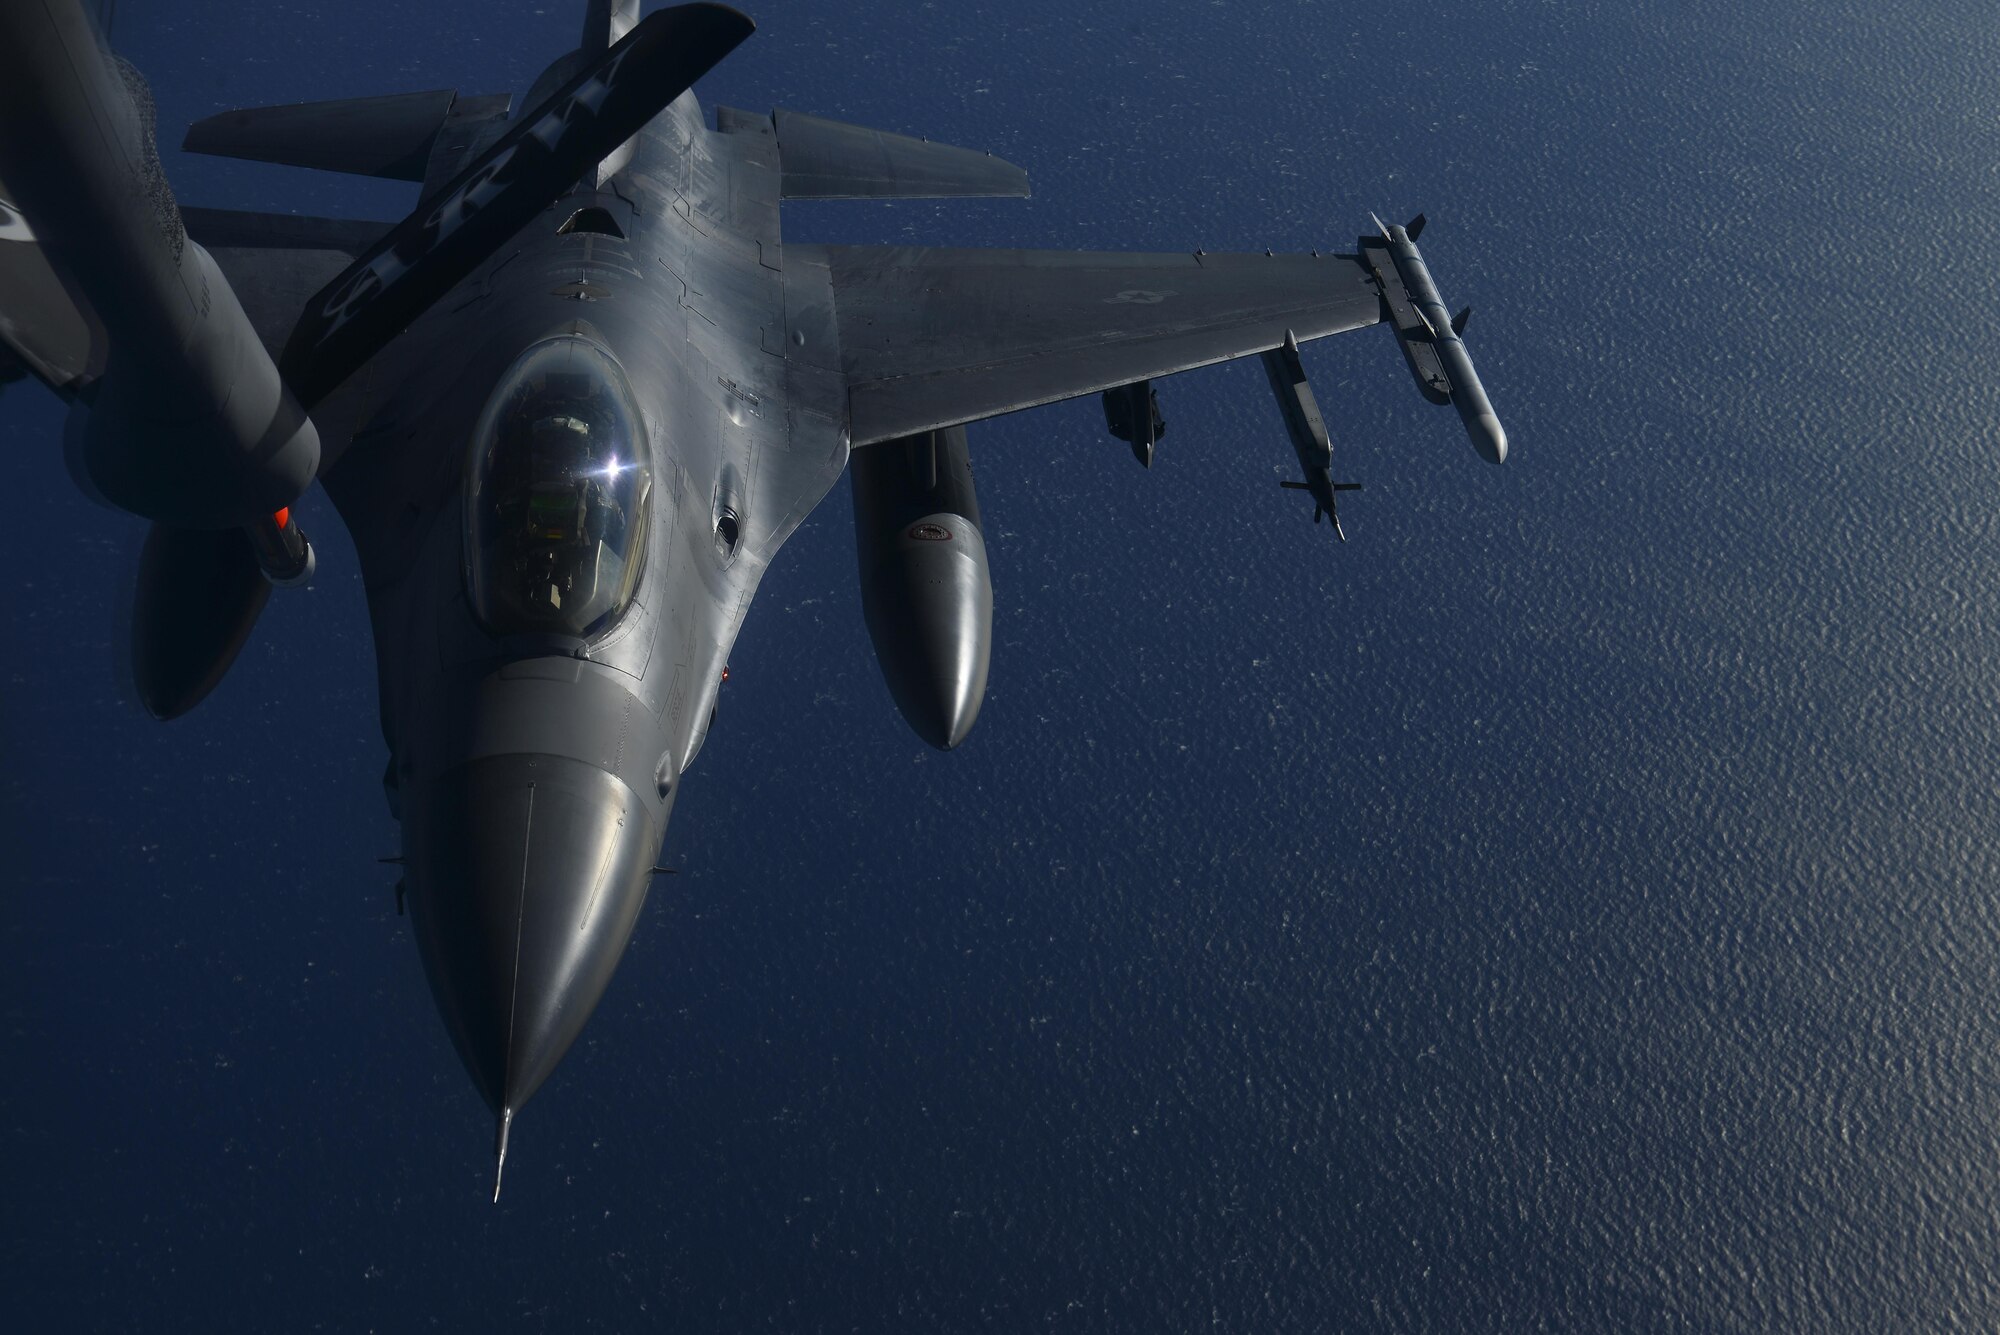 A U.S. Air Force F-16 Fighting Falcon assigned to the 31st Fighter Wing, Aviano Air Base, Italy, prepares to take fuel over the Mediterranean Sea from a KC-135 Stratotanker assigned to the 100th Air Refueling Wing, RAF Mildenhall, England, during Exercise Tonnerre Lighting Nov. 9, 2016. Tonnerre Lightning is a trilateral exercise with France and the U.K. that has taken place biannually since 2014. The training focuses on refining communication procedures while building interoperability capabilities and readiness to conduct combined air operations. (U.S. Air Force photo by Staff Sgt. Micaiah Anthony)